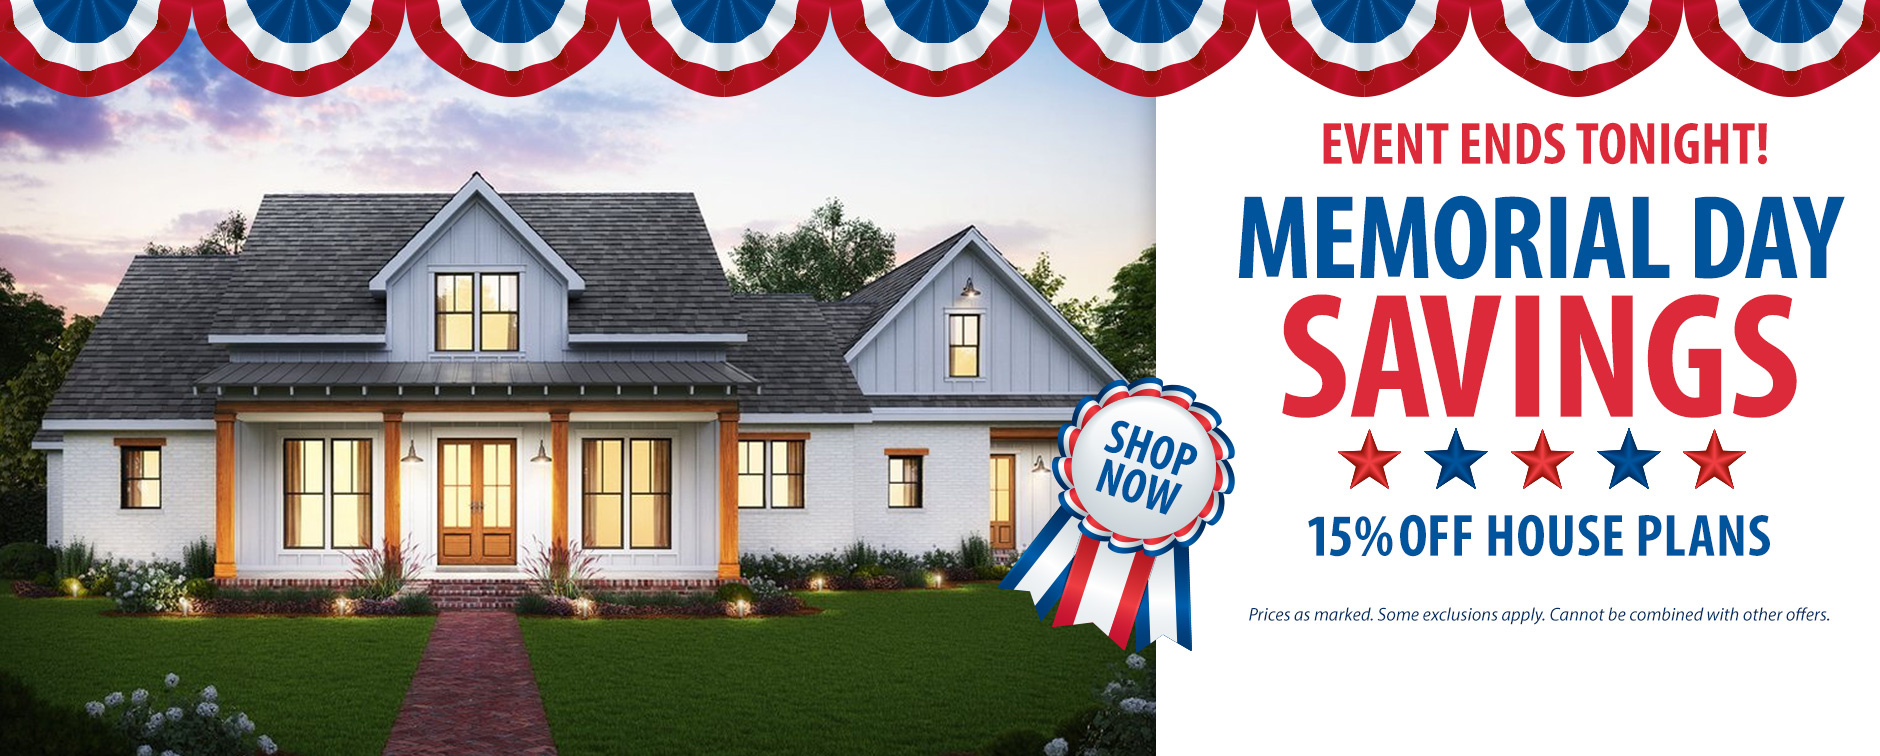 The Memorial Day House Plan Sale Ends Tonight